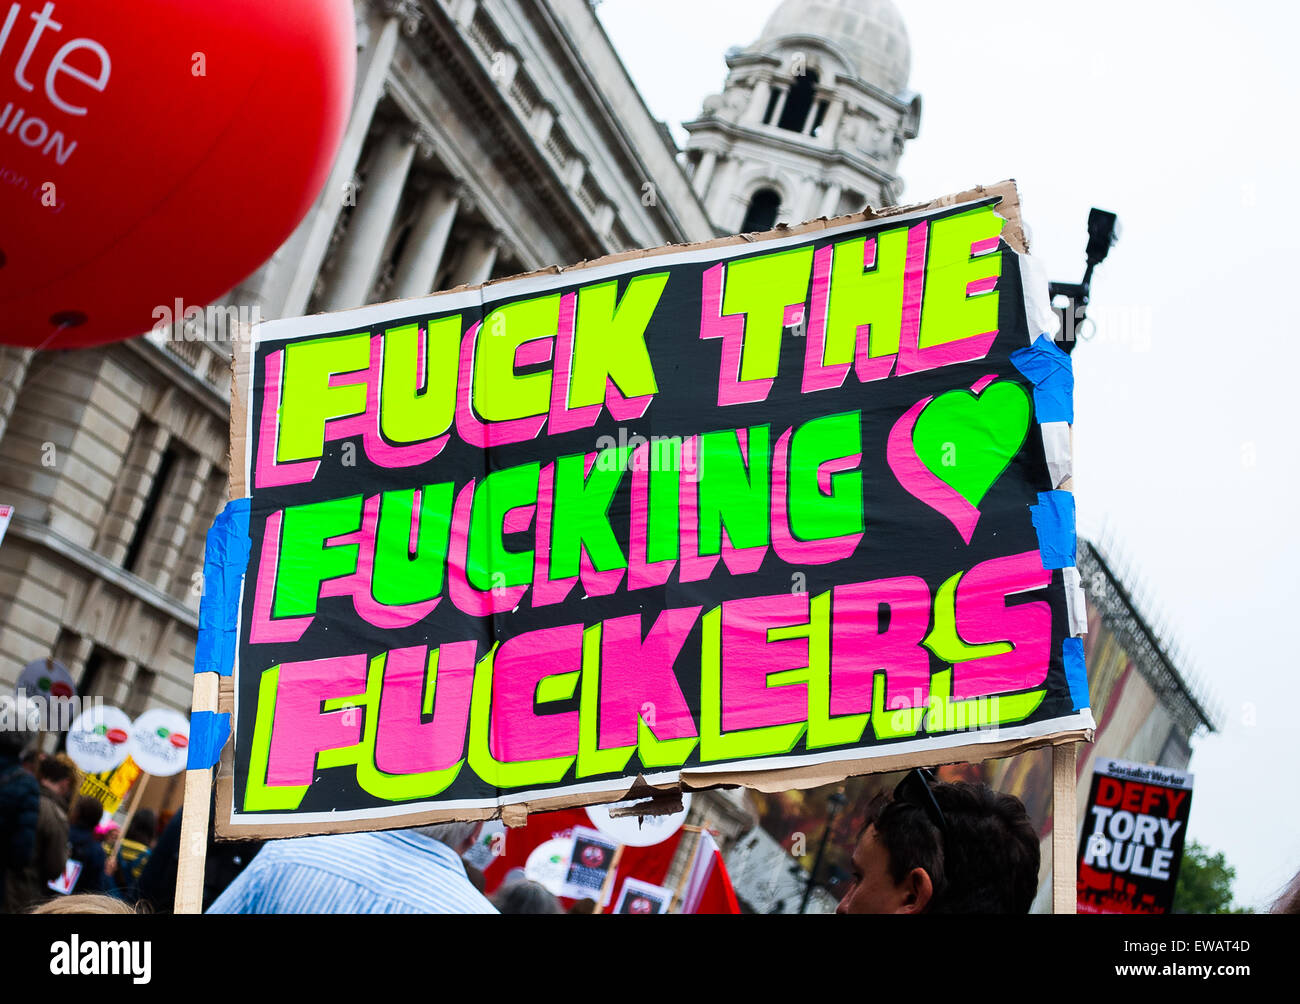 A angry protest sign captured during the Anti-Austerity protest in London. Stock Photo